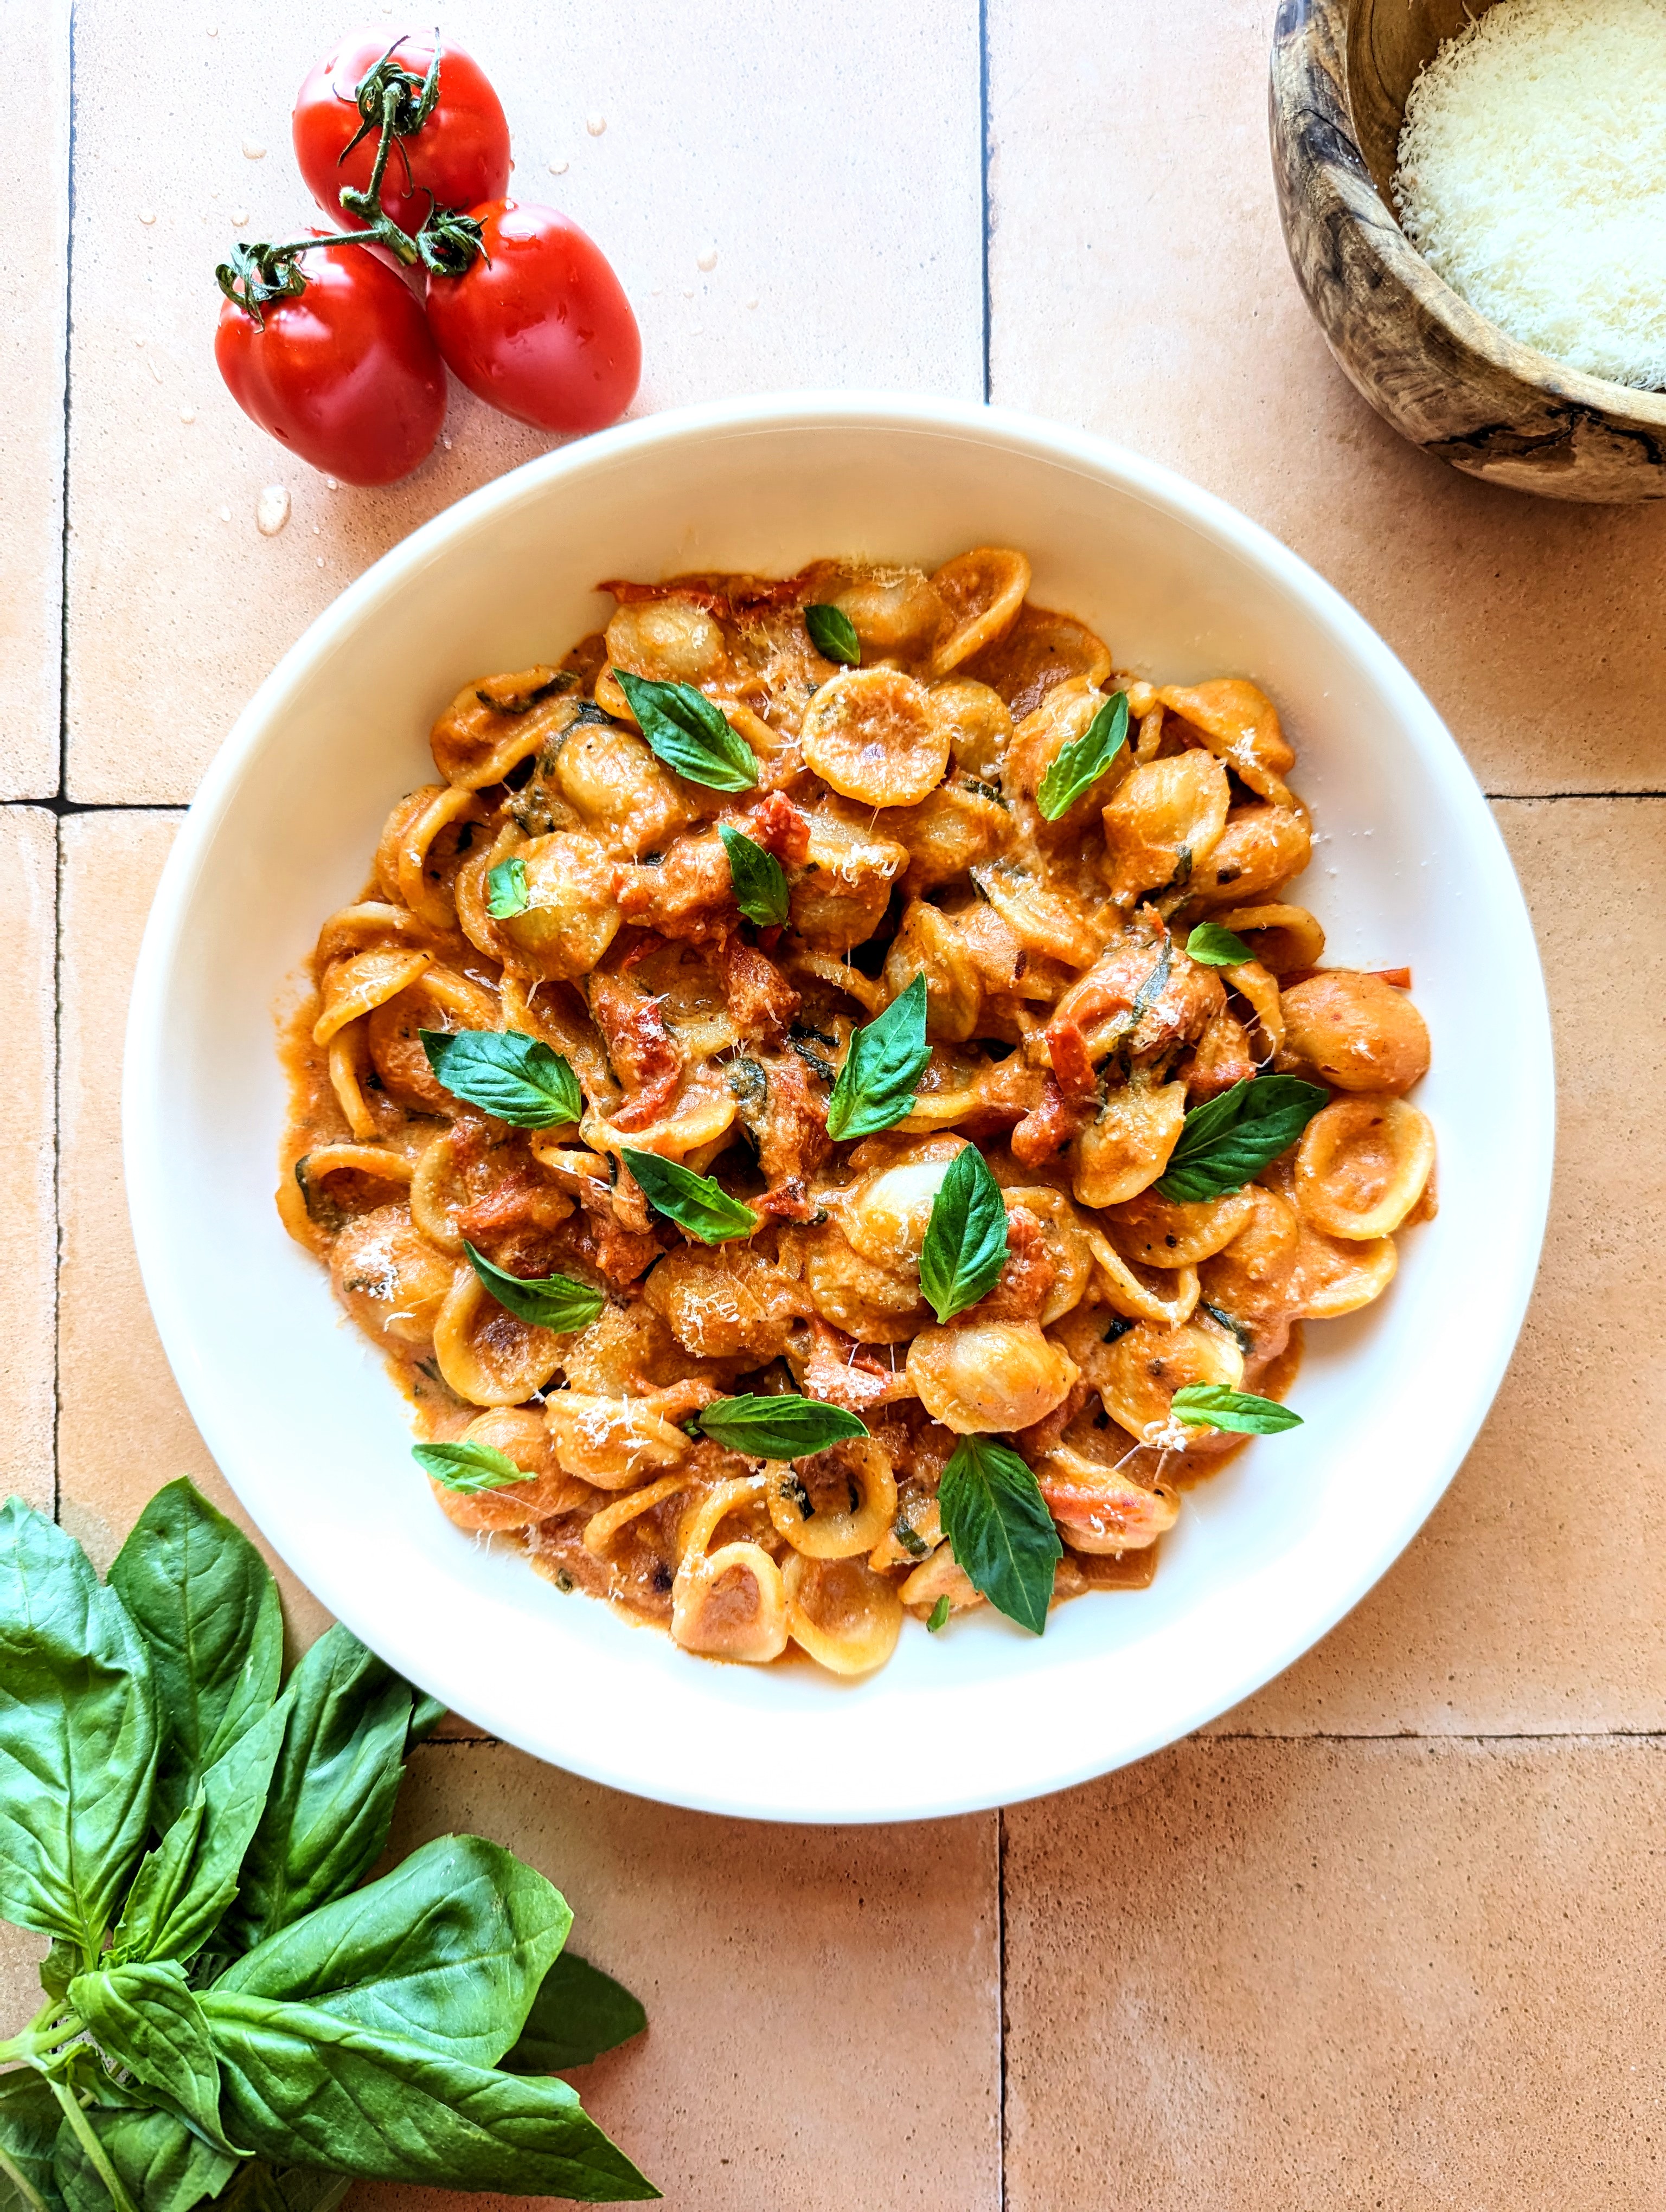 A bowl of creamy tomato basil pasta garnished with small, green, fresh basil leaves.